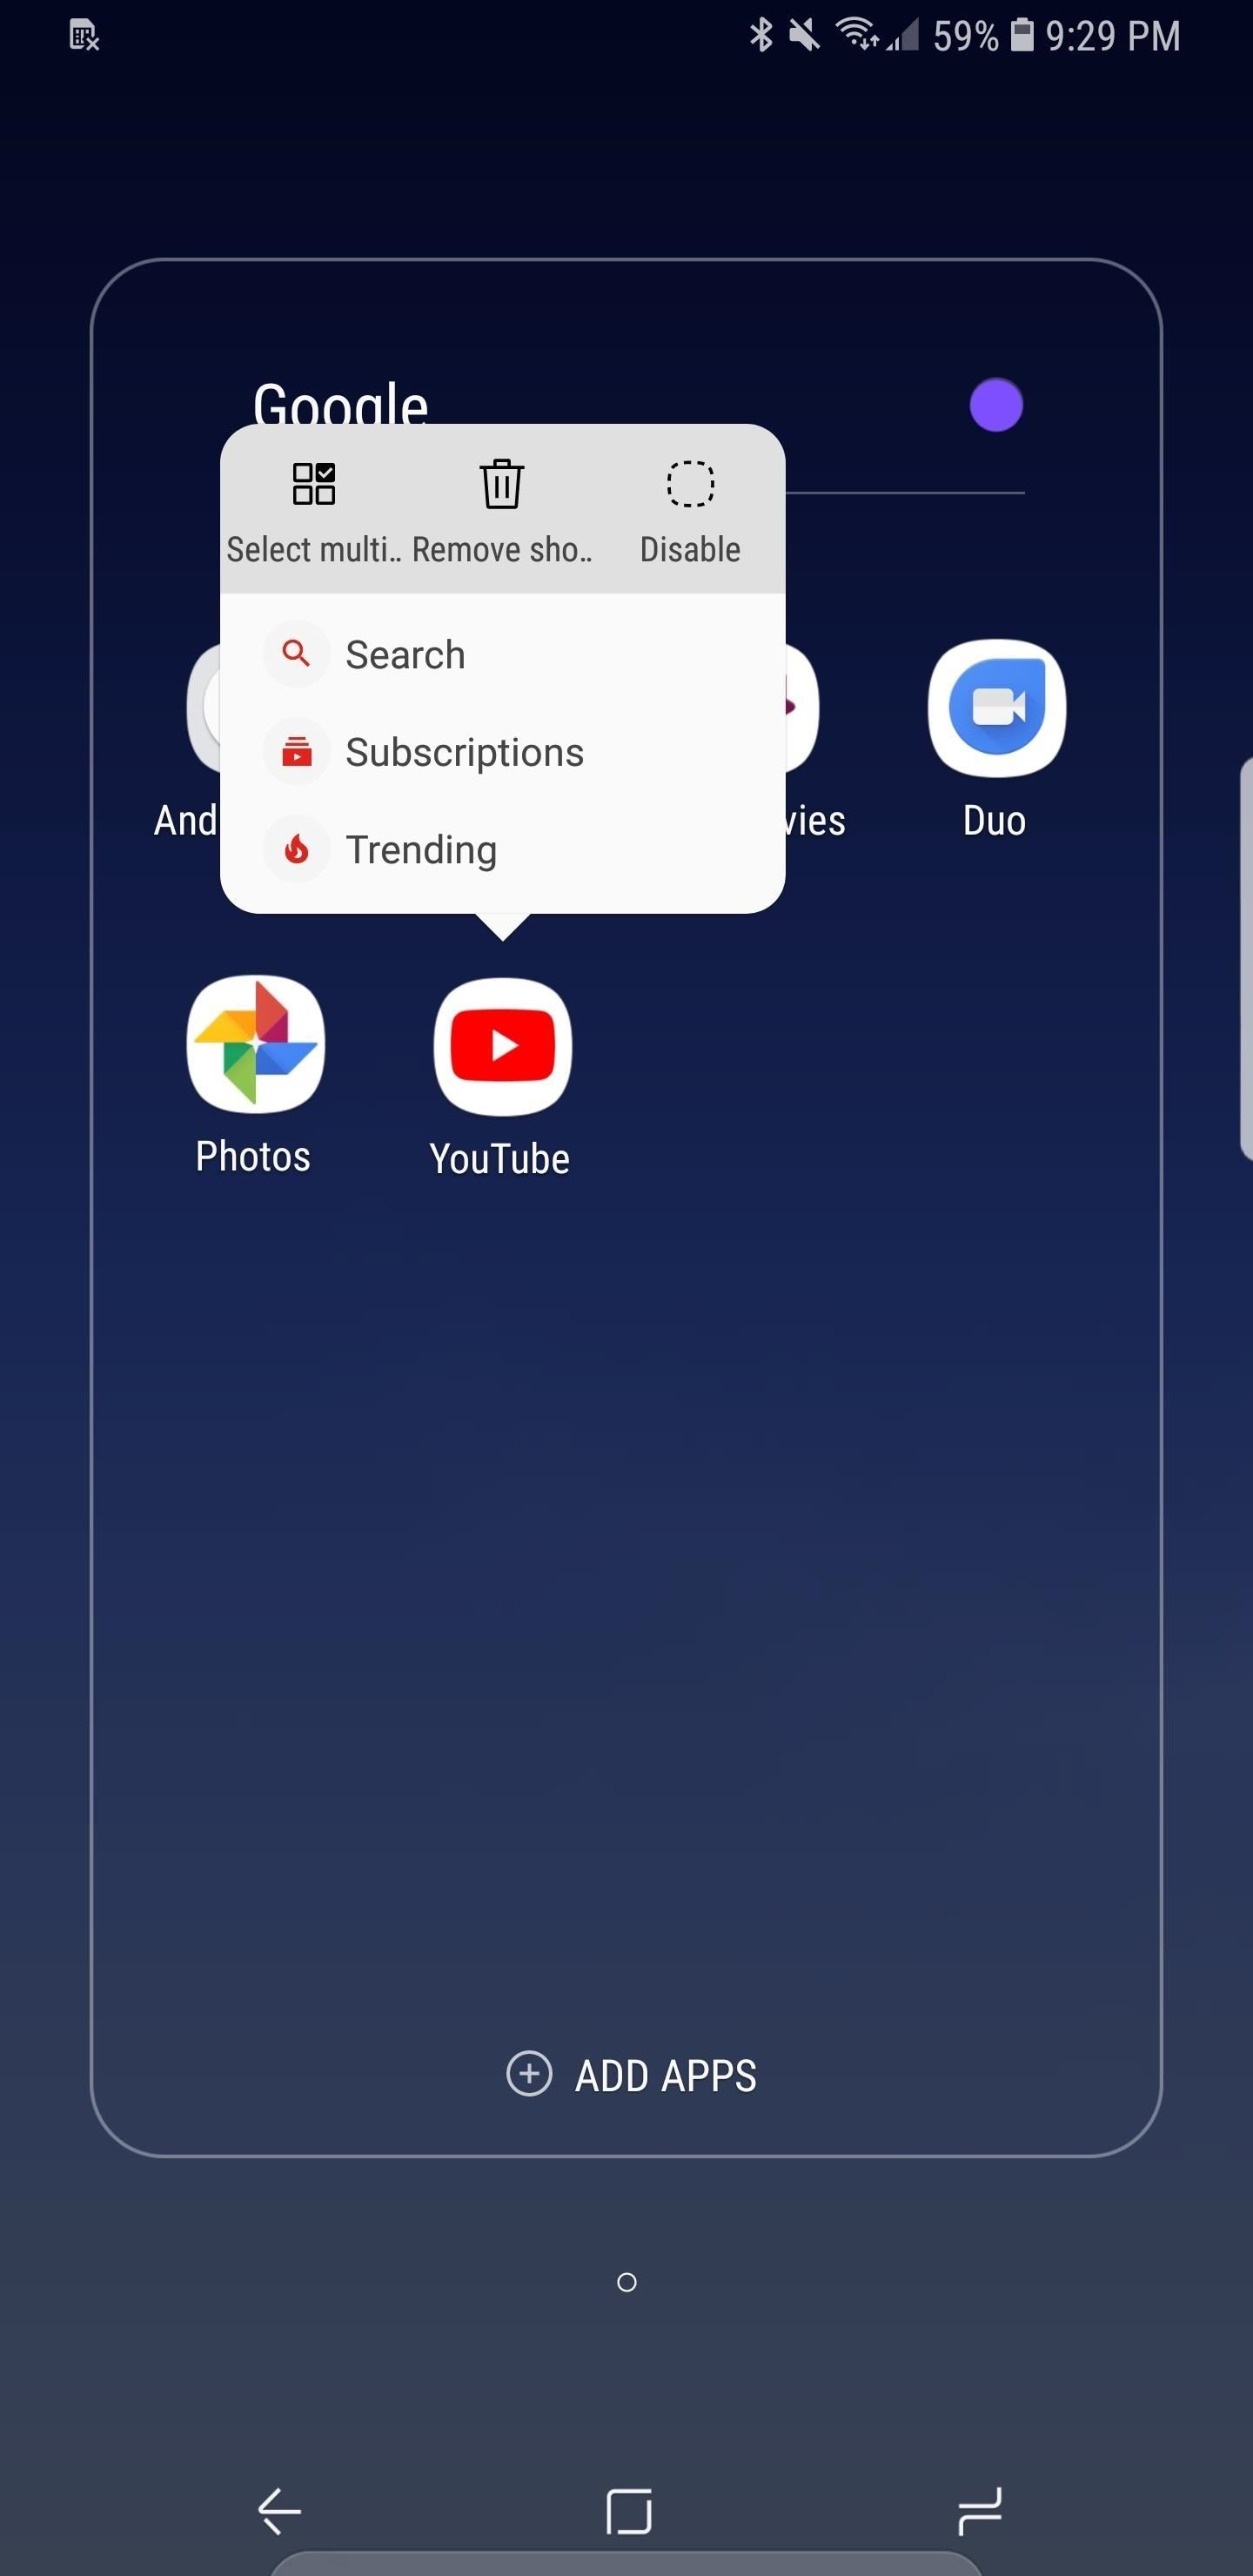 Here Are Some of the Cool New Home Screen Features on the Galaxy S9